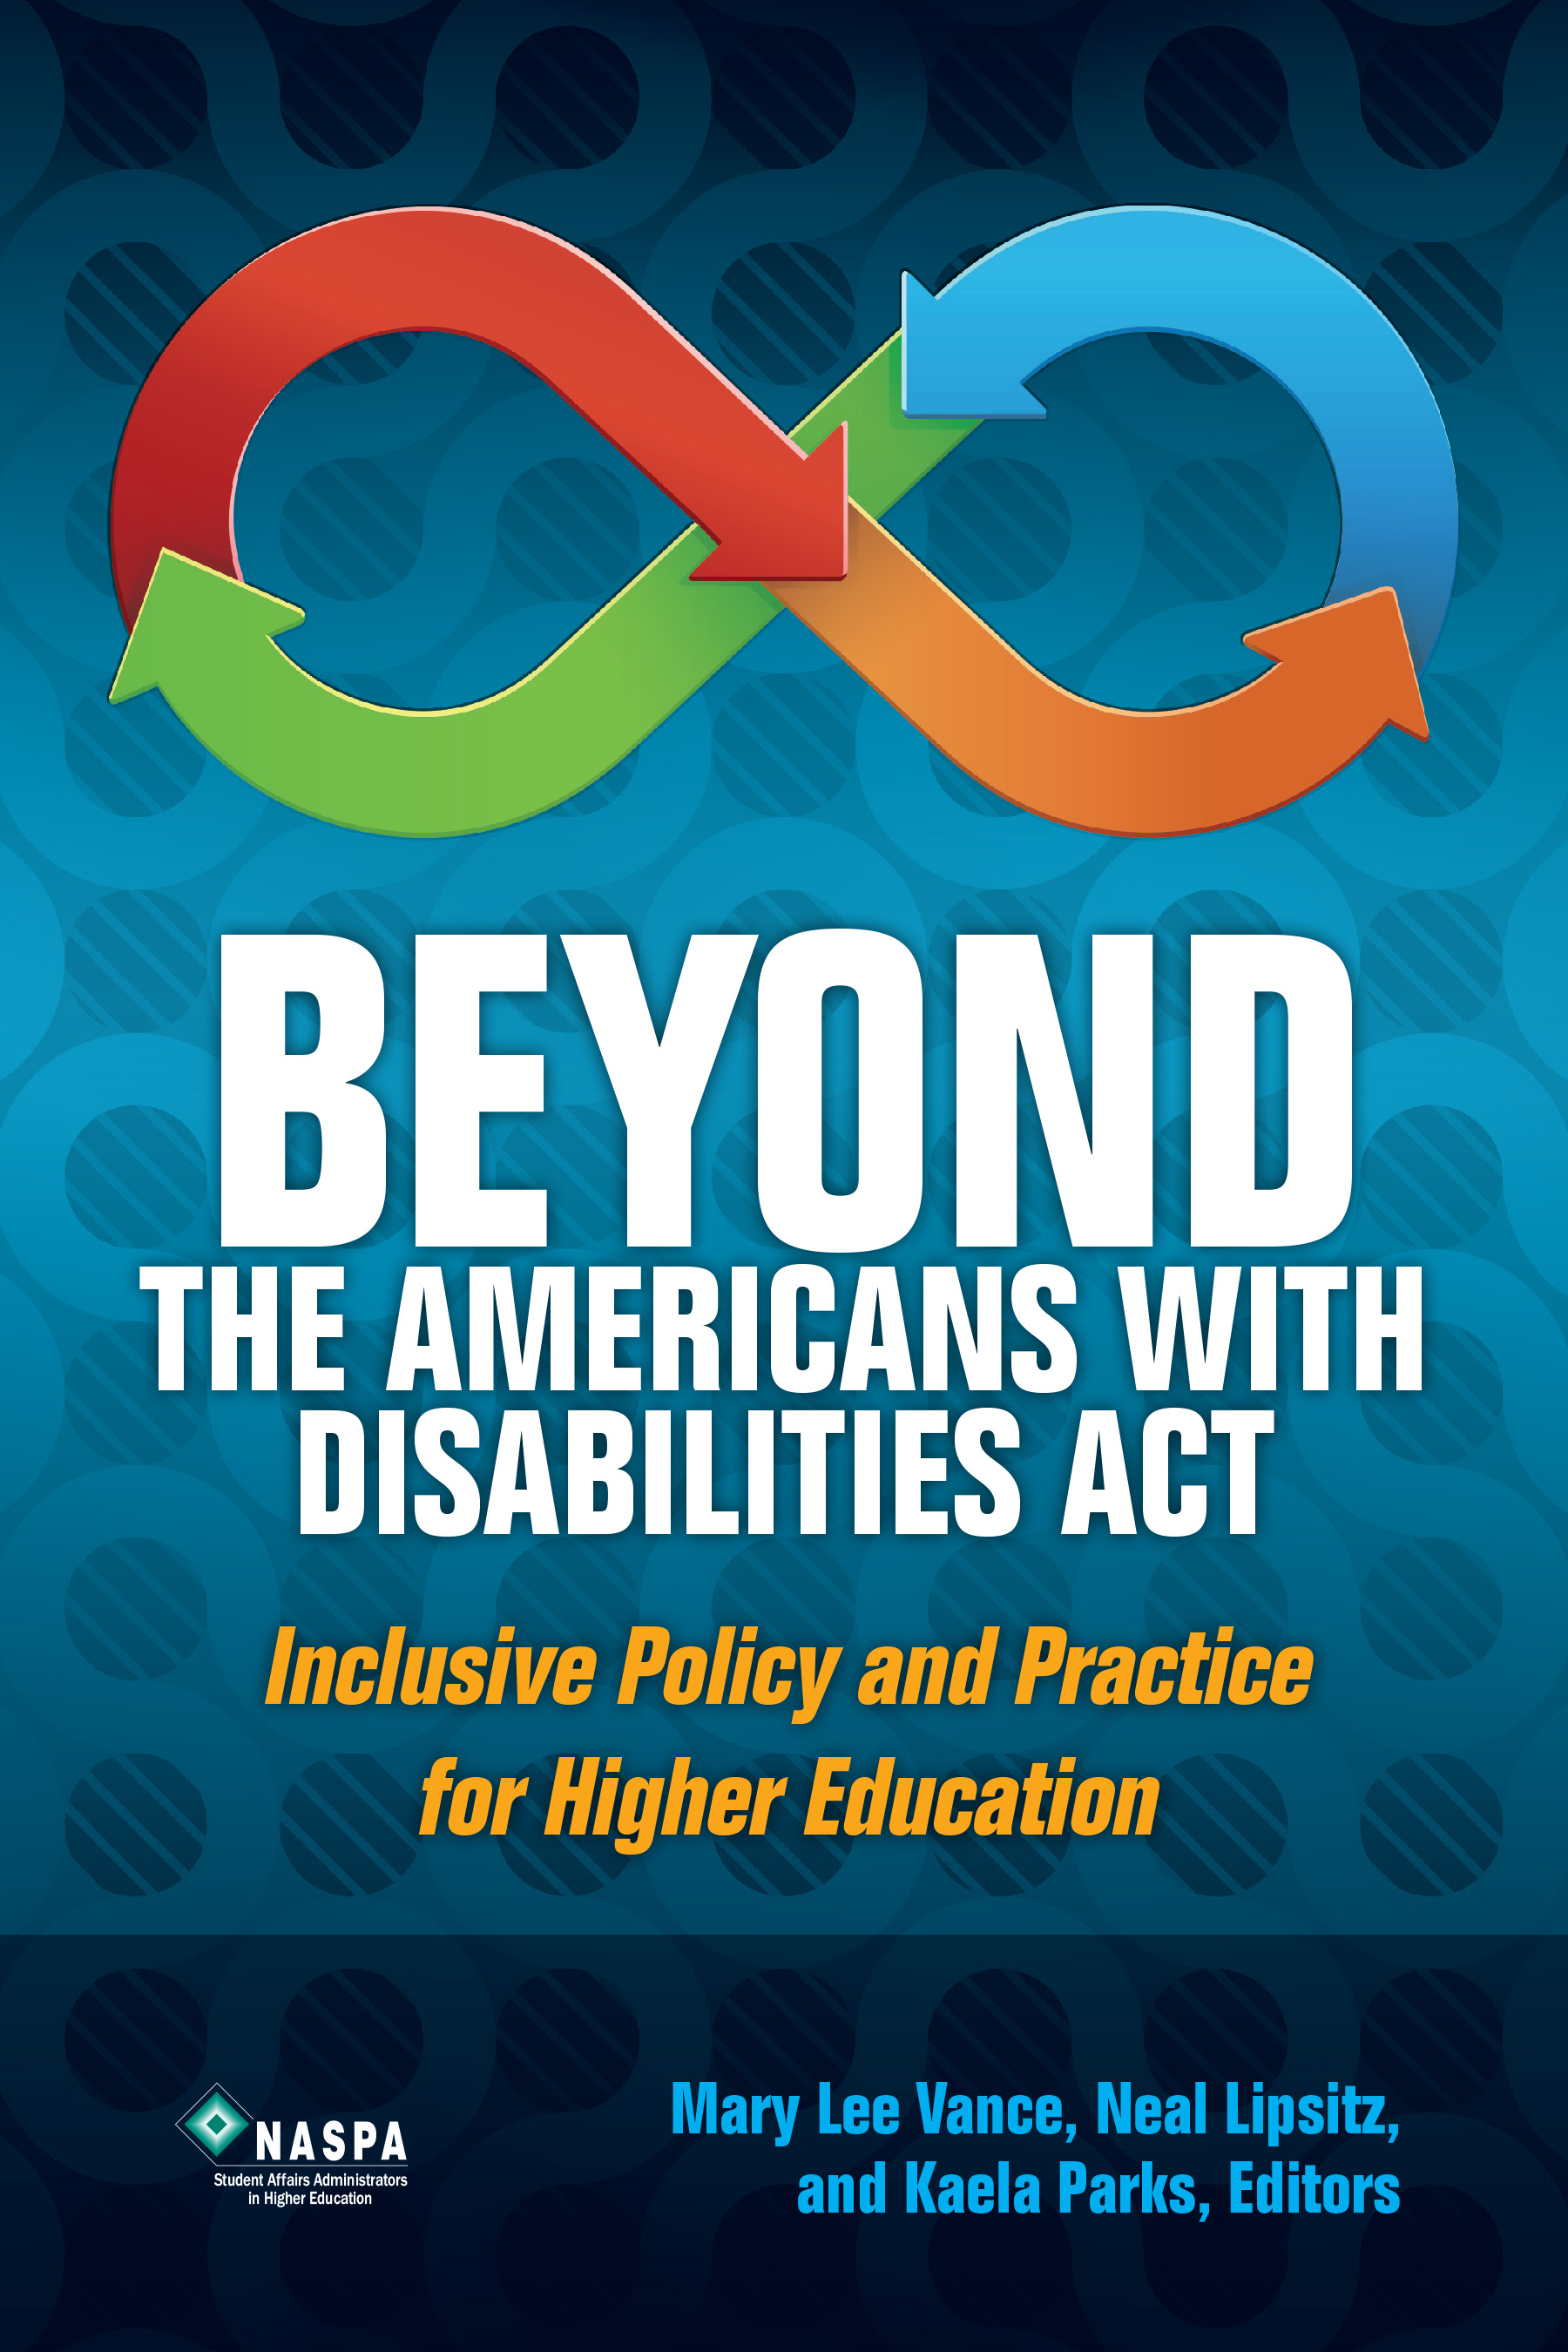 Beyond the Americans with Disabilities Act: Inclusive Policy and Practice for Higher Education